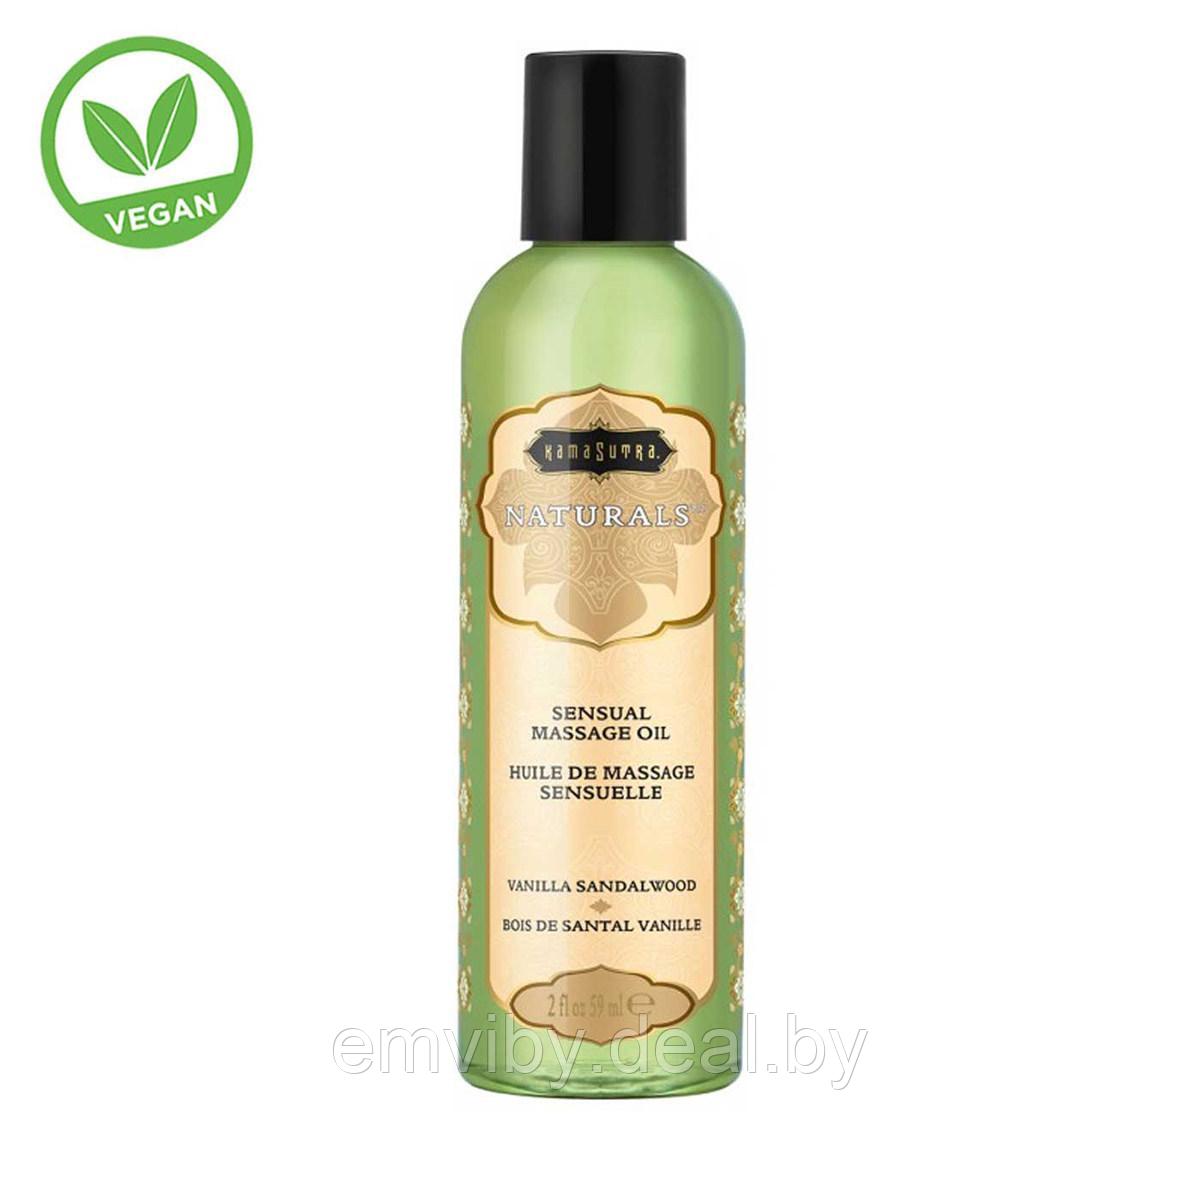 Массажное масло Naturals massage oil Coconut pineapple 59 мл - фото 1 - id-p225116592